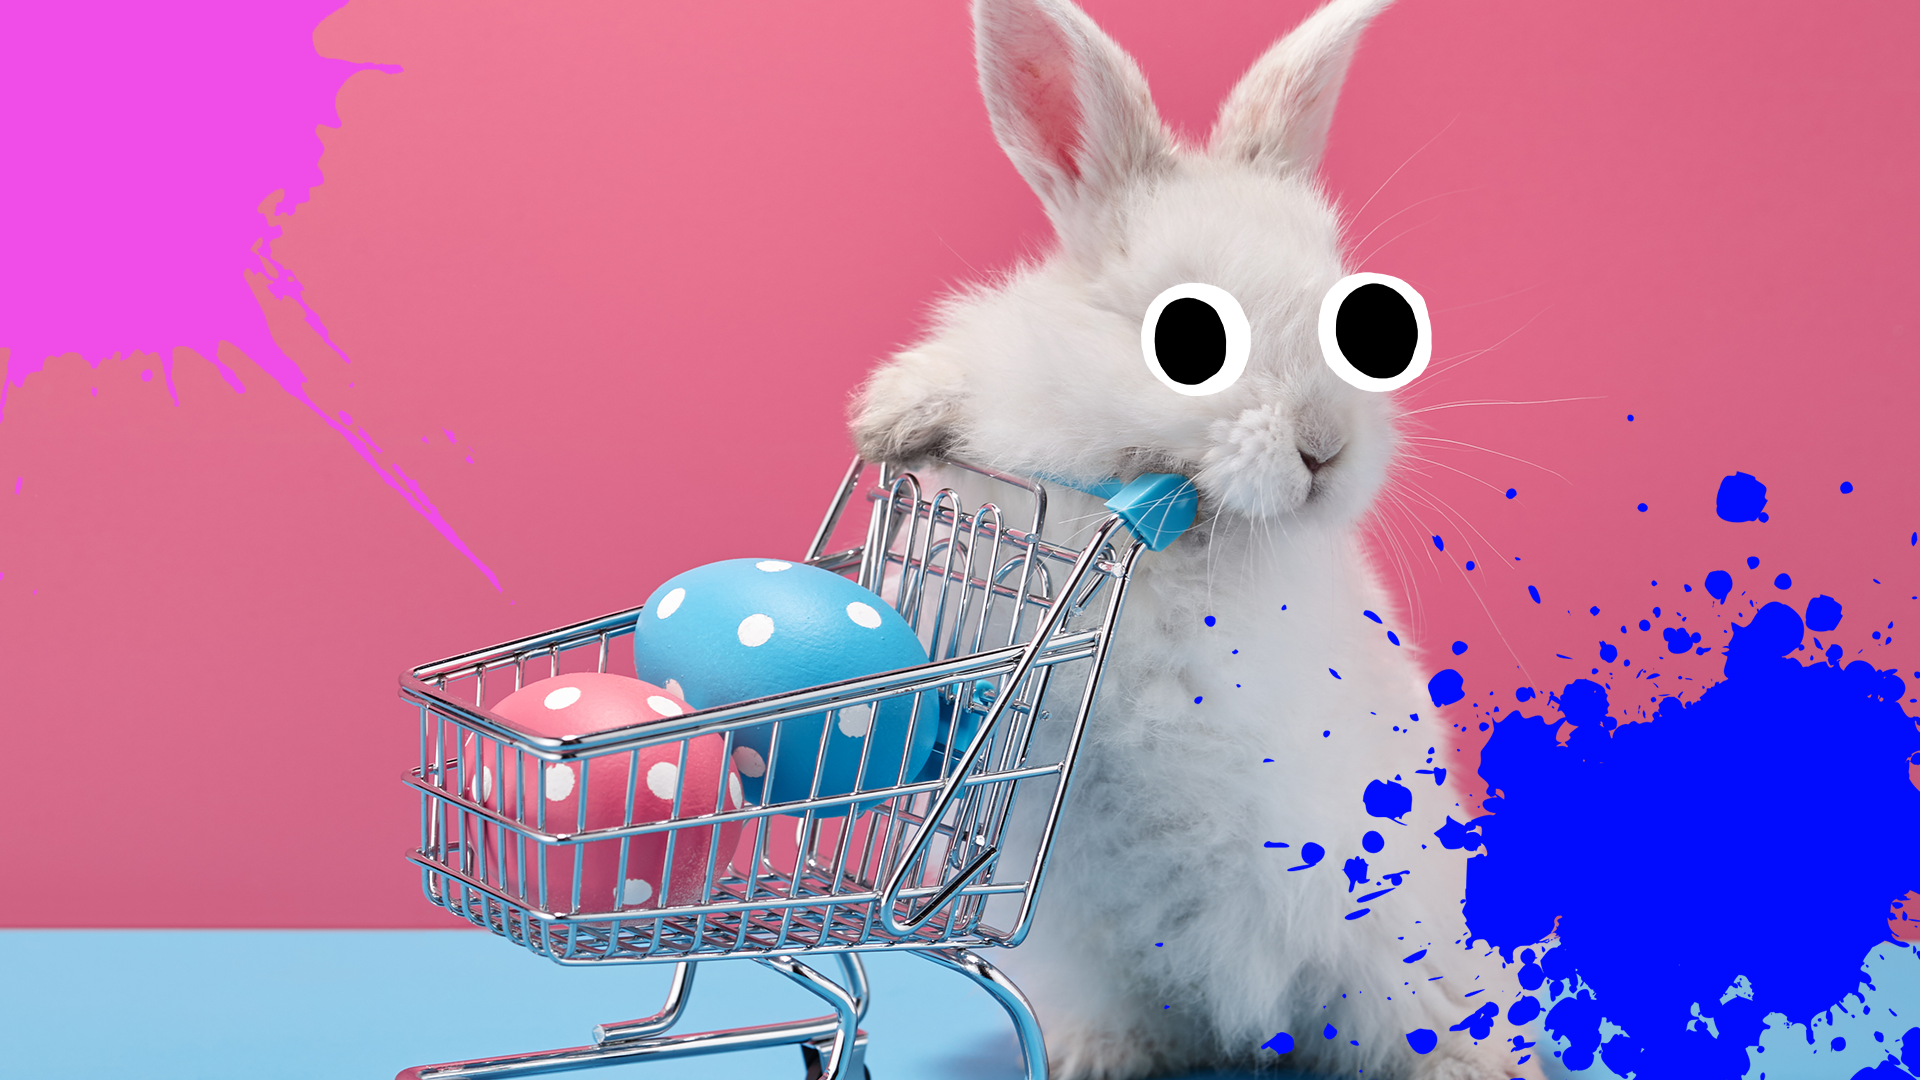 Bunny pushing trolley full of eggs on pastel background